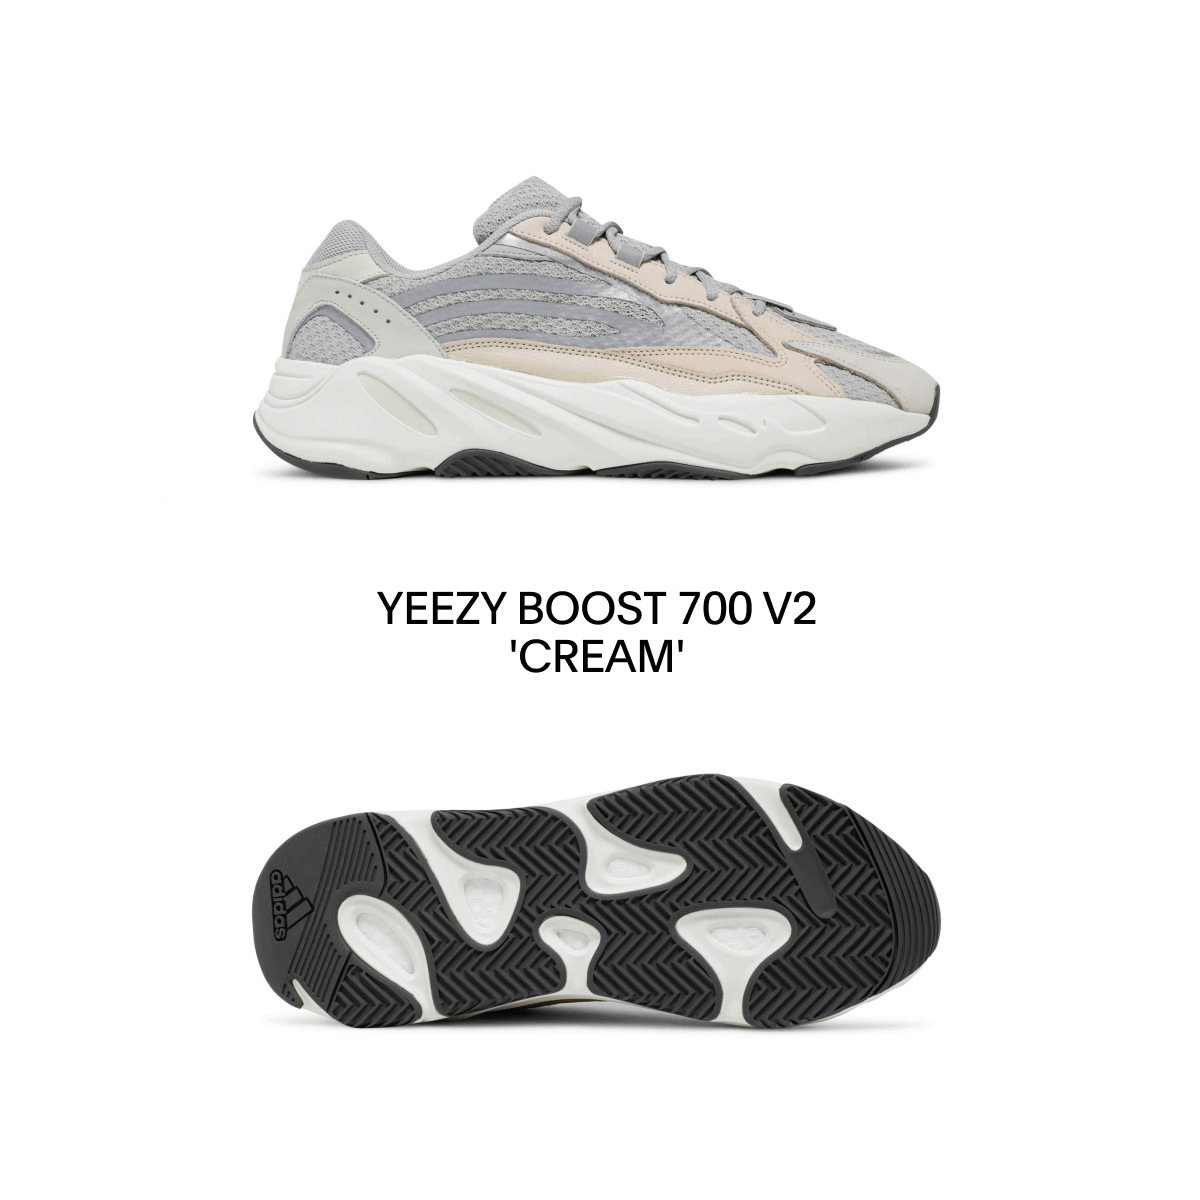 campo en lugar concepto GOAT: [SEED] Just Dropped: Yeezy Boost 700 V2 'Cream' available now | Milled